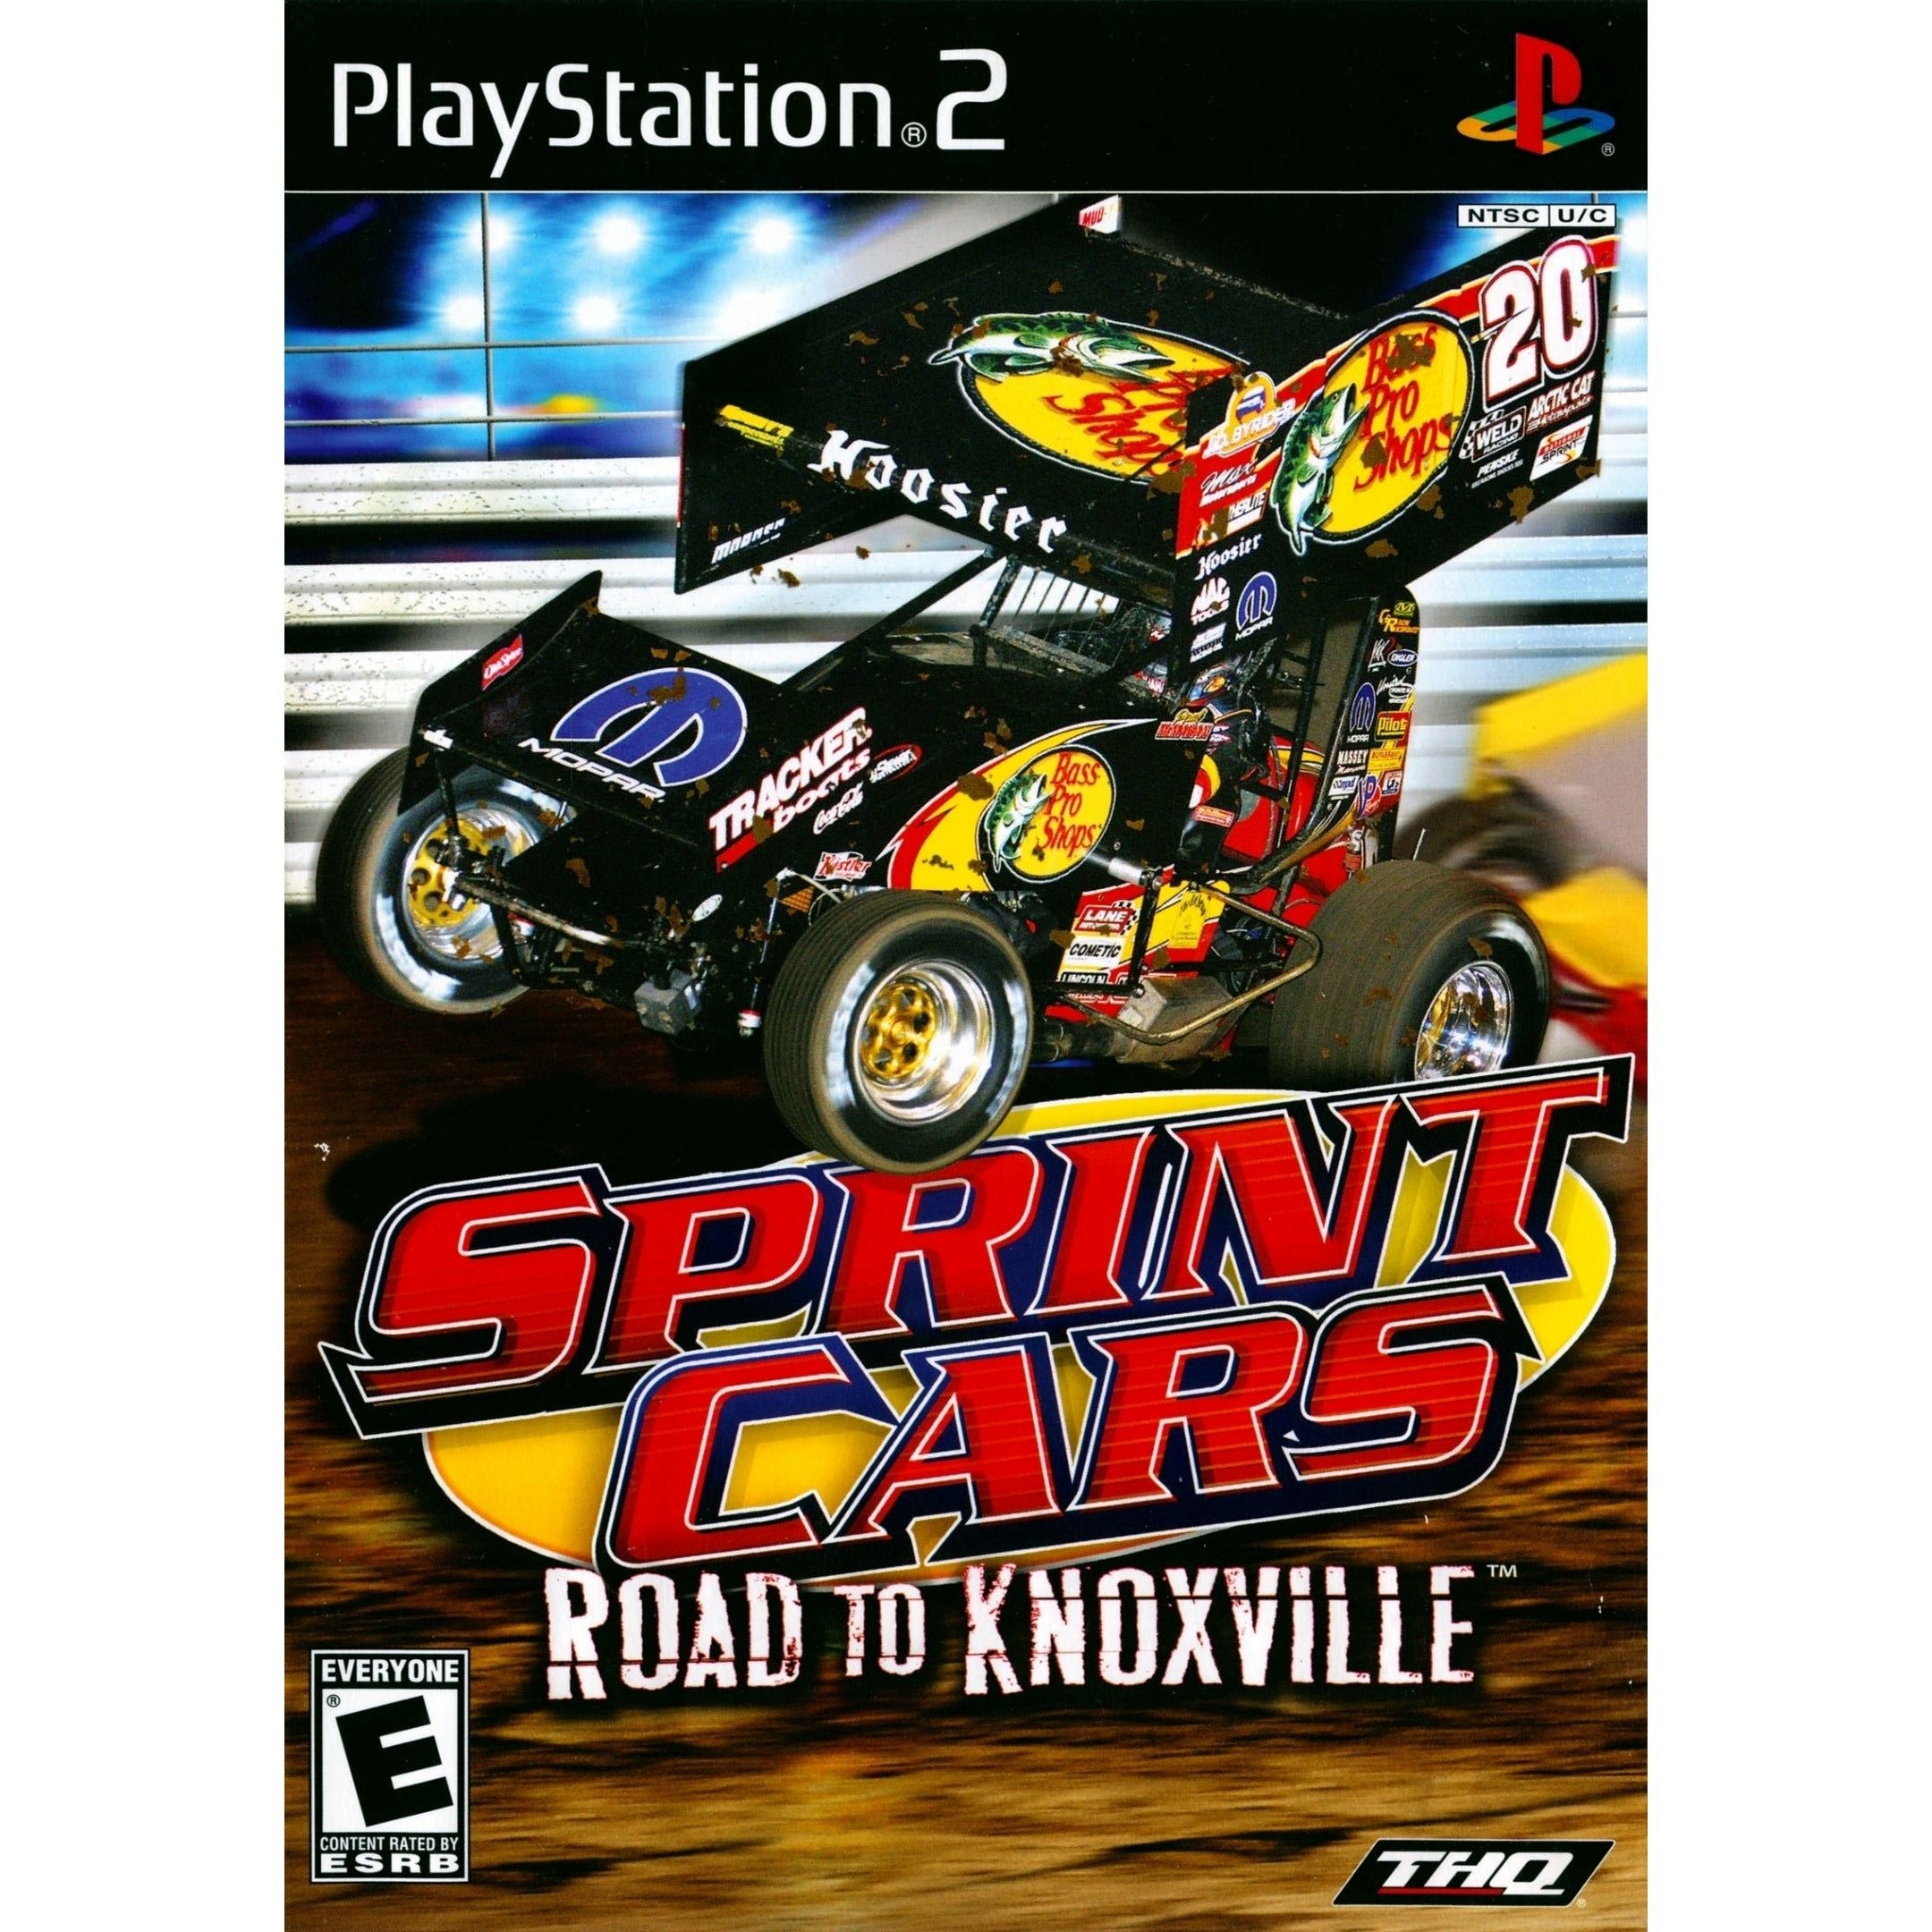 PS2 - Sprint Cars Road to Knoxville